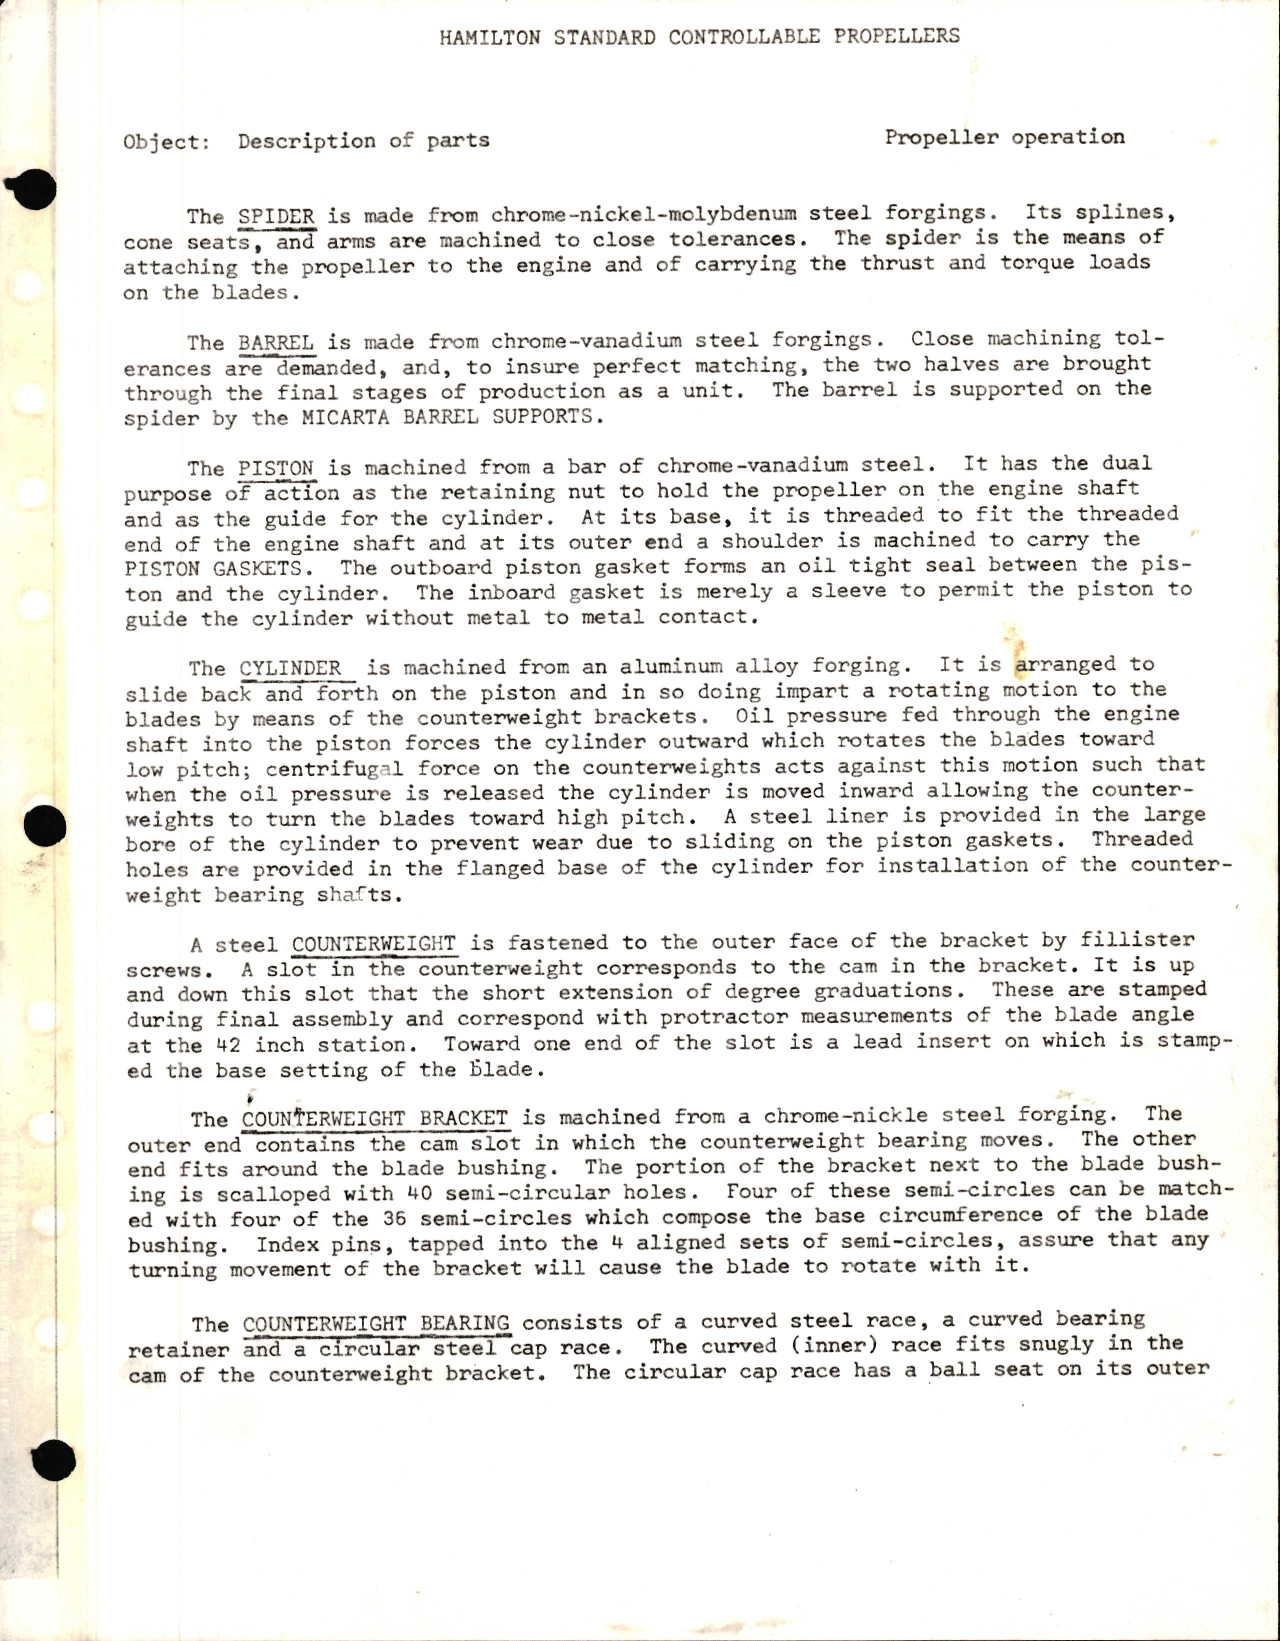 Sample page 1 from AirCorps Library document: Hamilton Standard Controllable Propellers Student Instruction